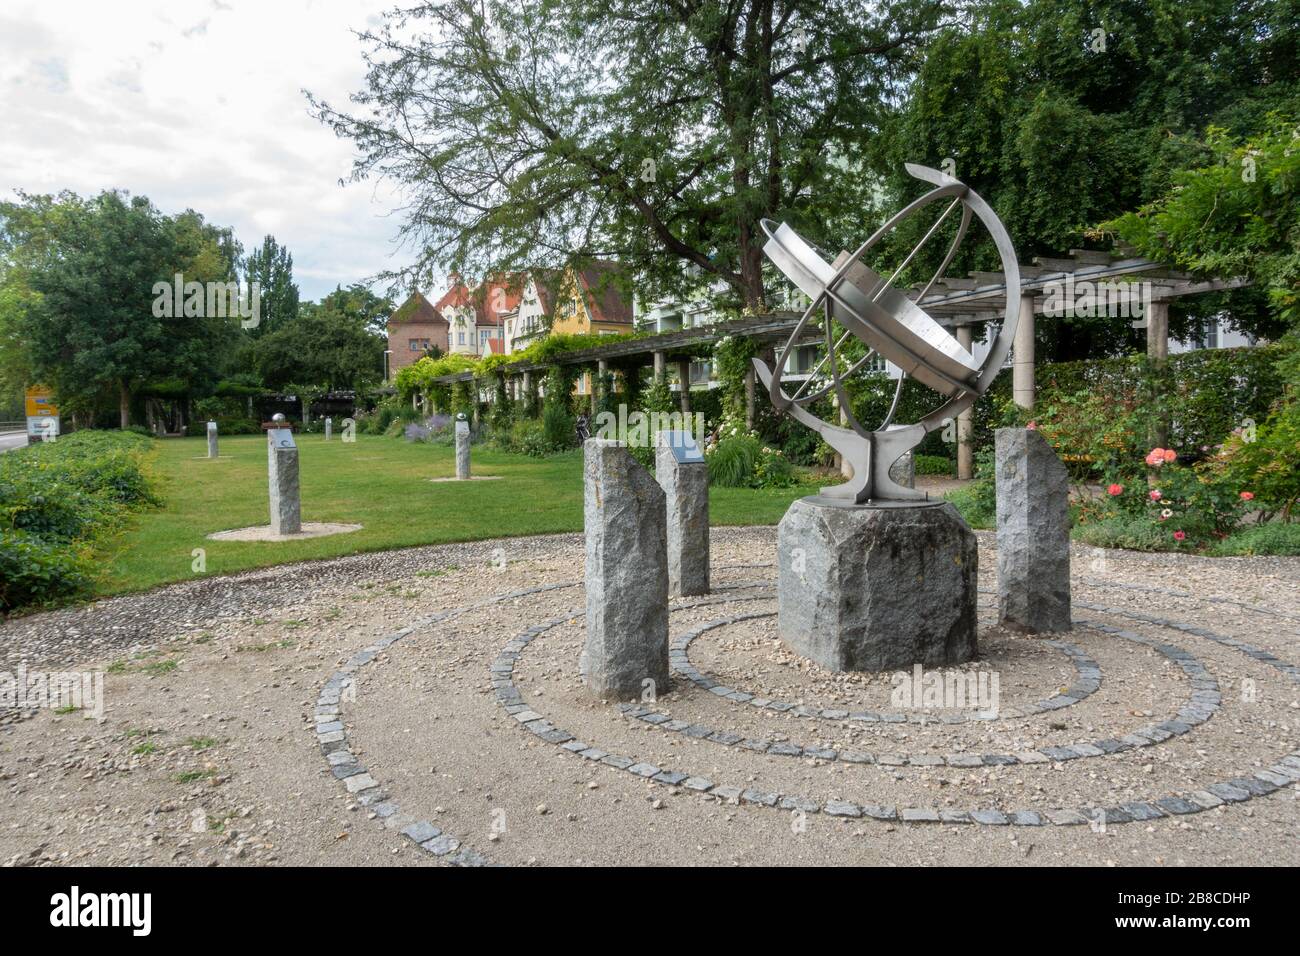 The Die Planetoiden (The planets) in the Astronomiepark Ingolstadt (Ingolstadt Astronomy Park) in Ingolstadt, Bavaria, Germany. Stock Photo